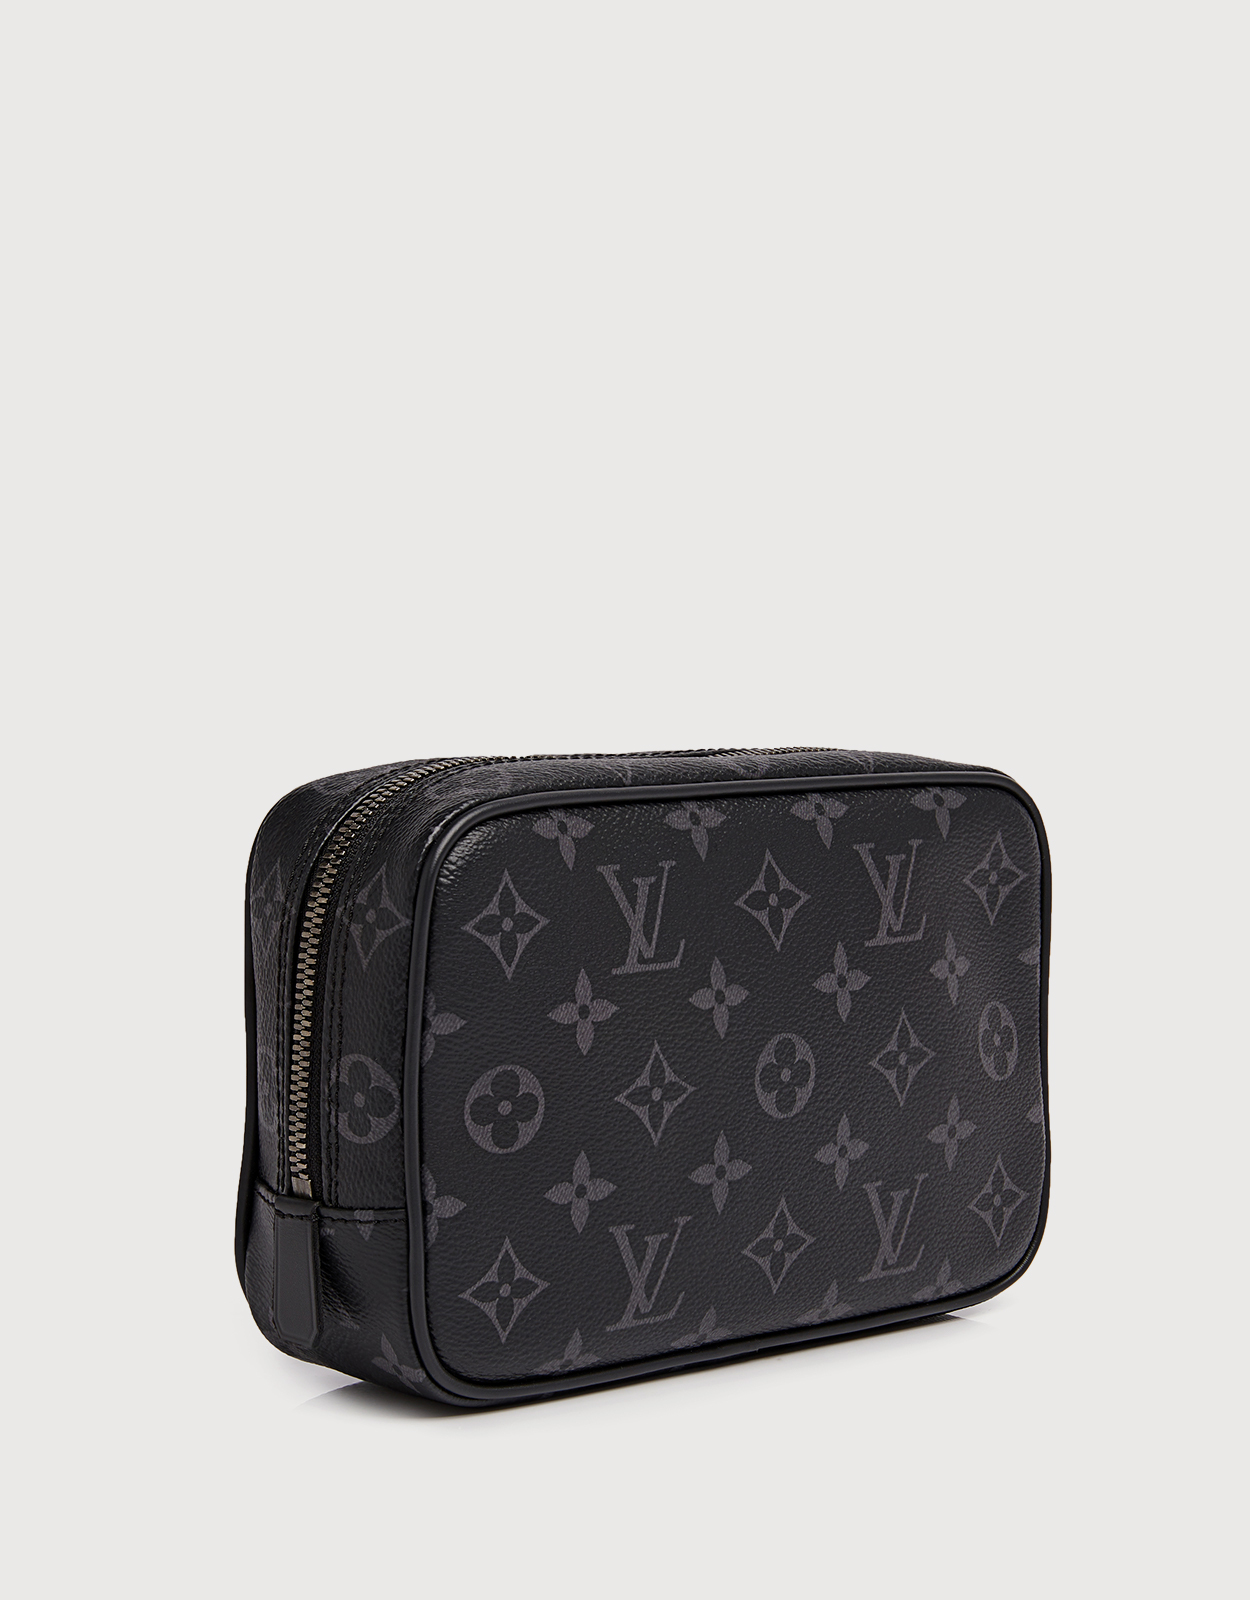 eksplodere Glow Forfølge Louis Vuitton Monogram Canvas Cosmetic Pouch (メイクアップ,化粧ポーチ) IFCHIC.COM